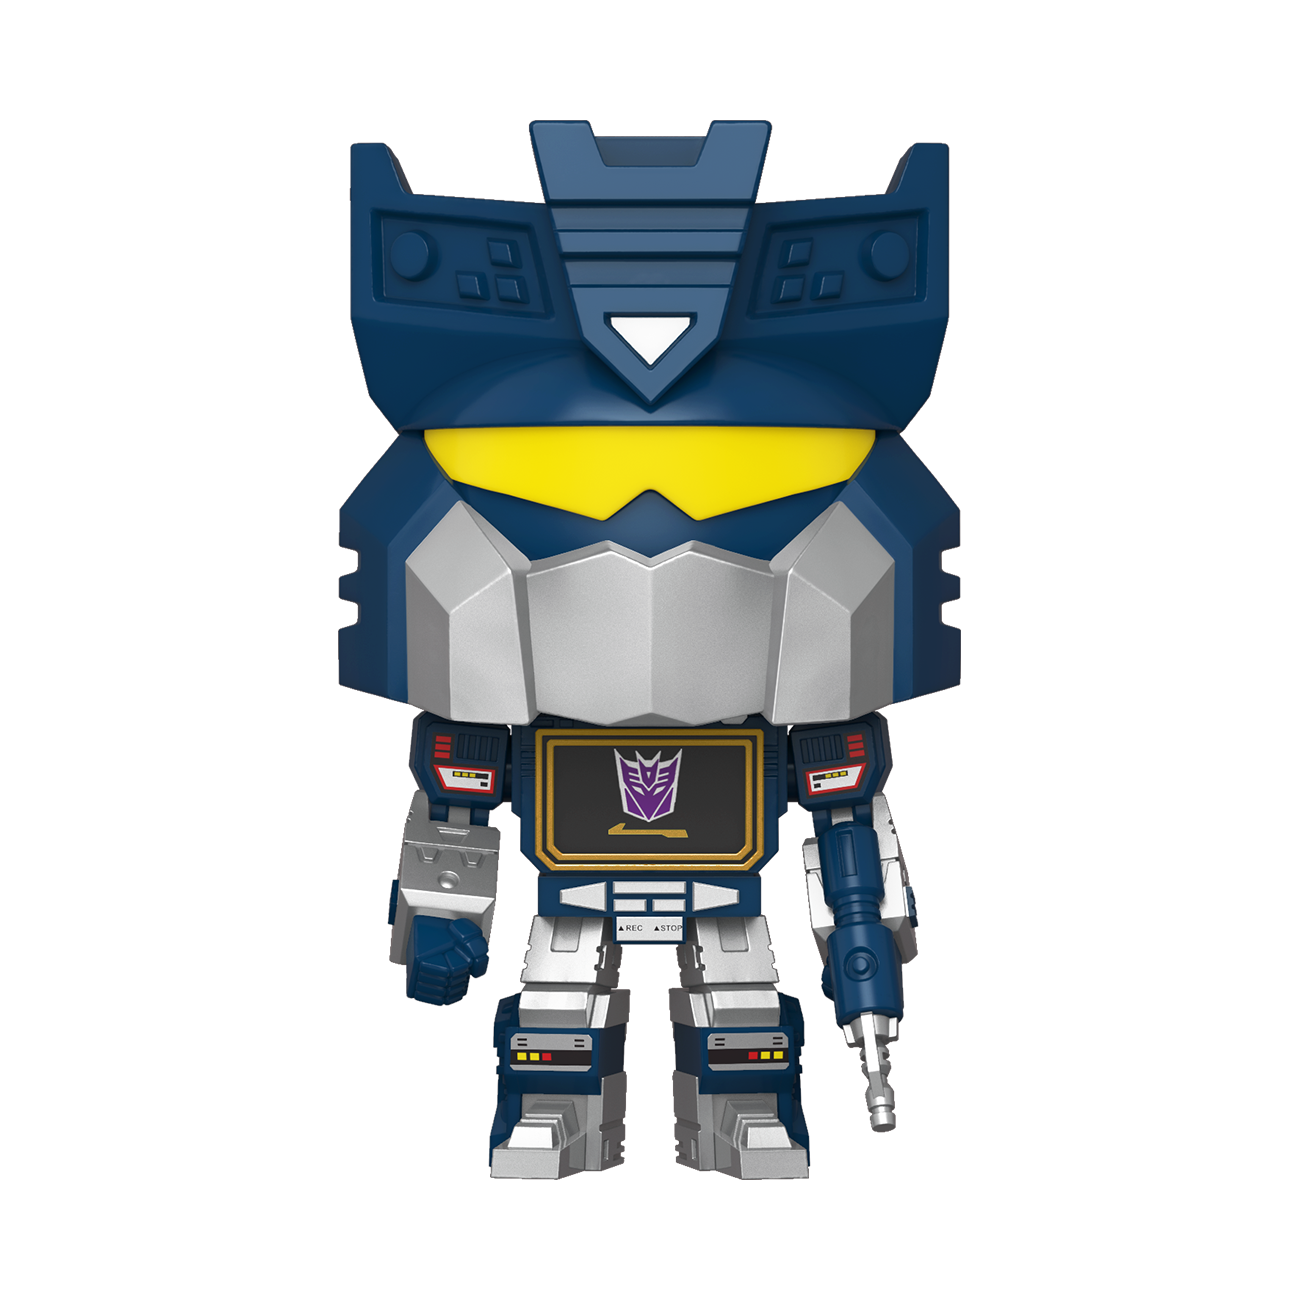 POP! Retro Toys (Jumbo Deluxe): 93 Transformers, Soundwave (Tapes) Exclusive